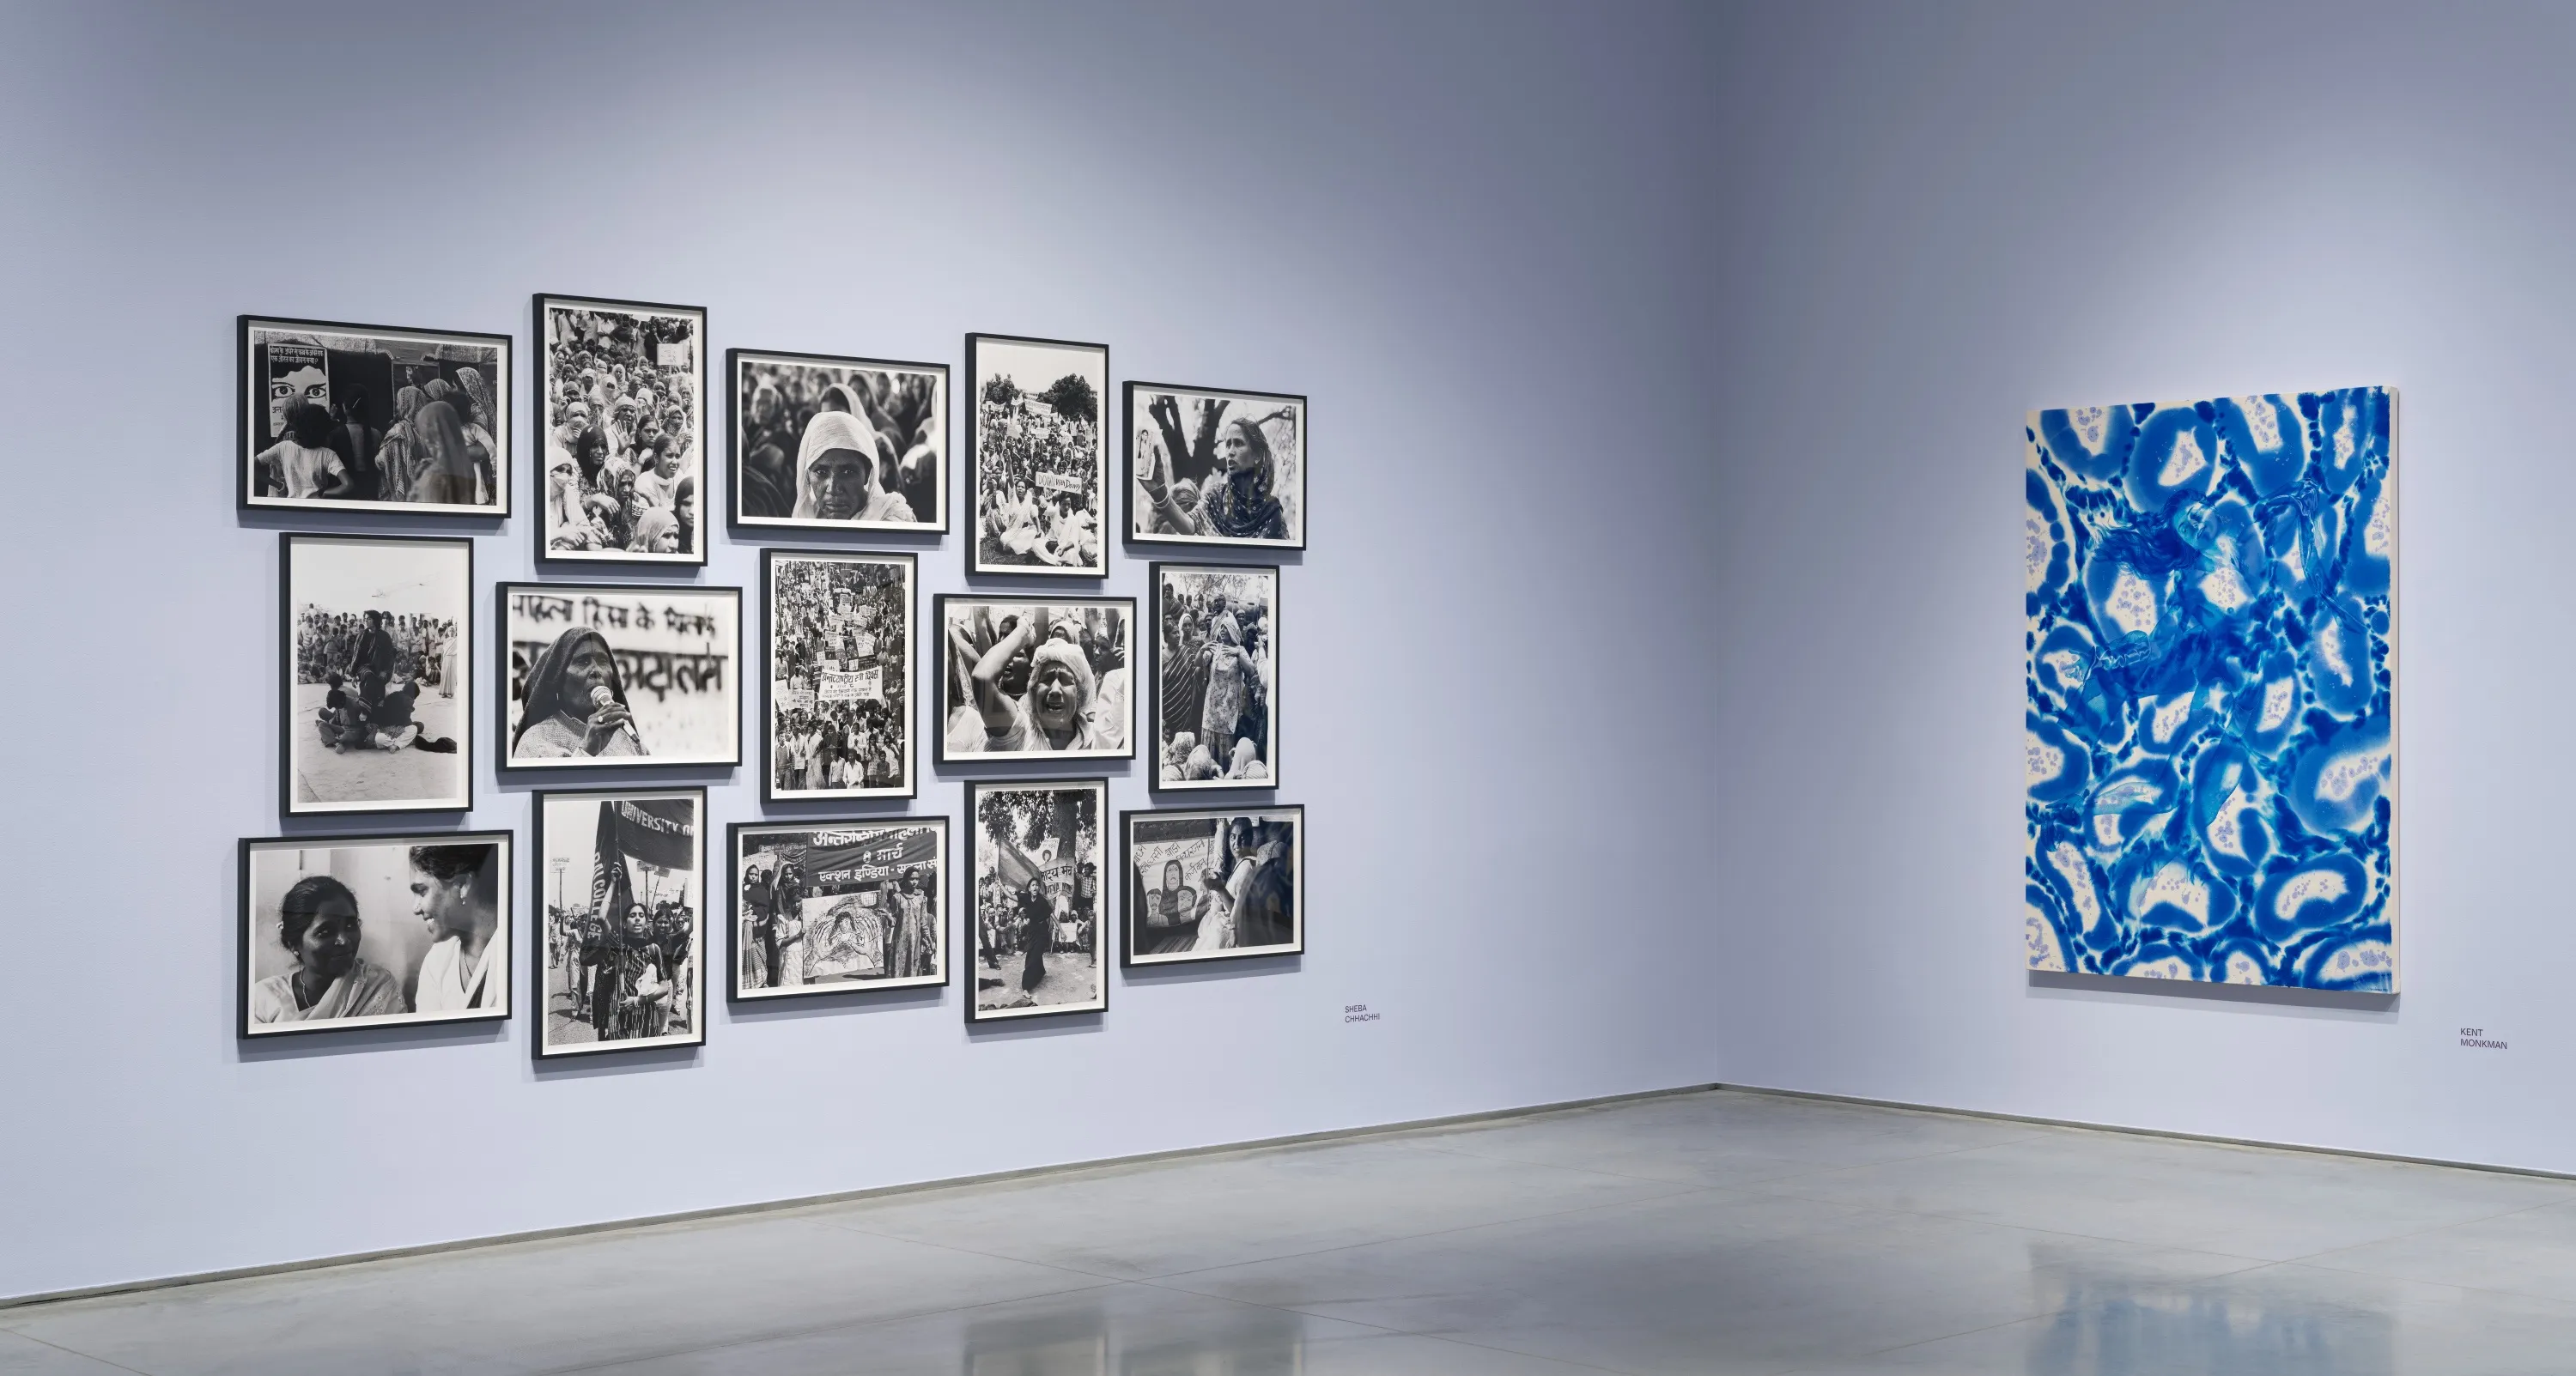 Gallery interior with light lavender walls and a gray floor. On the left wall is an arrangement of fifteen framed black and white photographs depicting protest movements. On the right wall is a painting featuring a blue and white pattern.